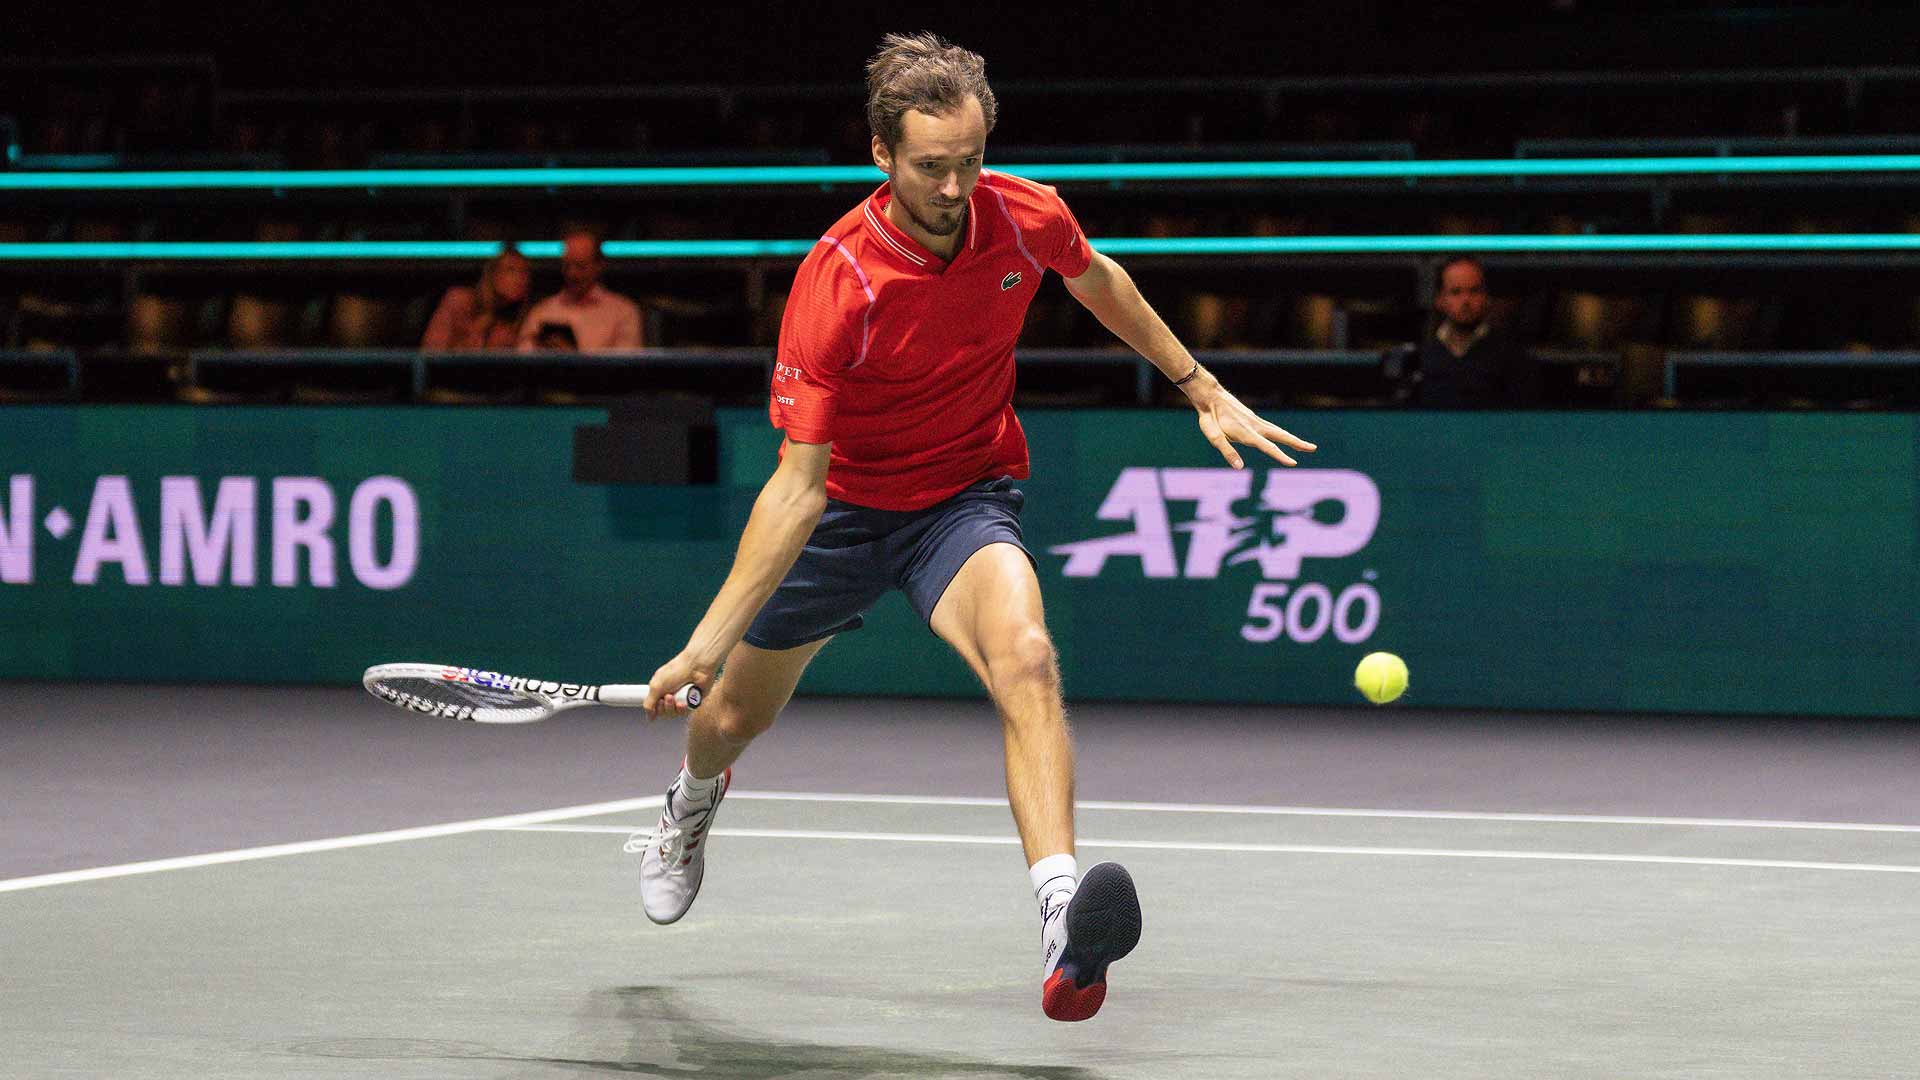 Daniil Medvedev in action against Felix Auger-Aliassime on Friday at the ABN AMRO Open in Rotterdam.